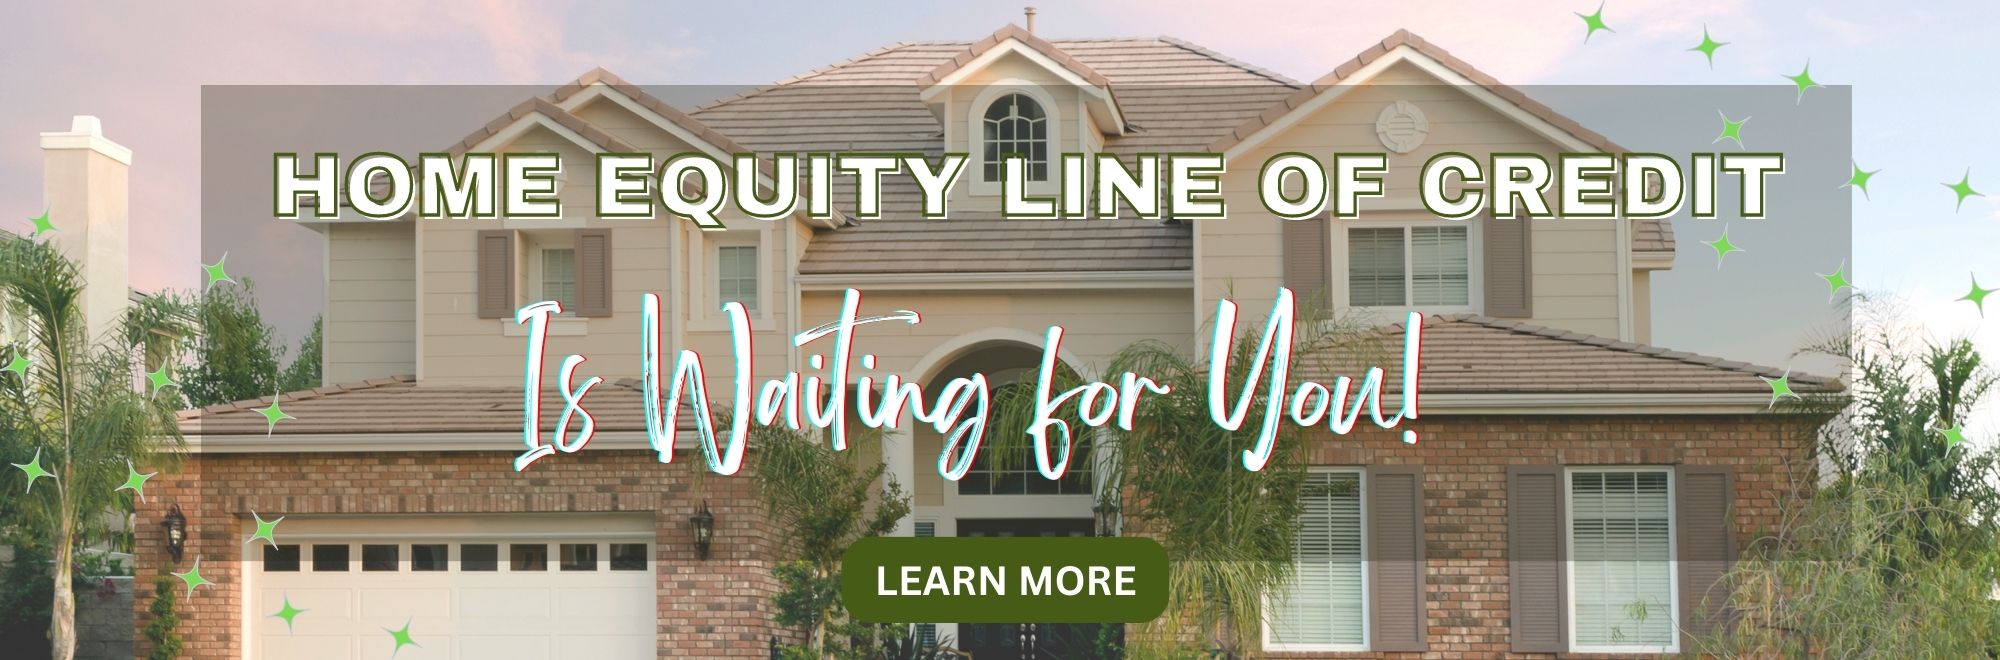 Home equity line of credit is waiting for you! Click to learn more